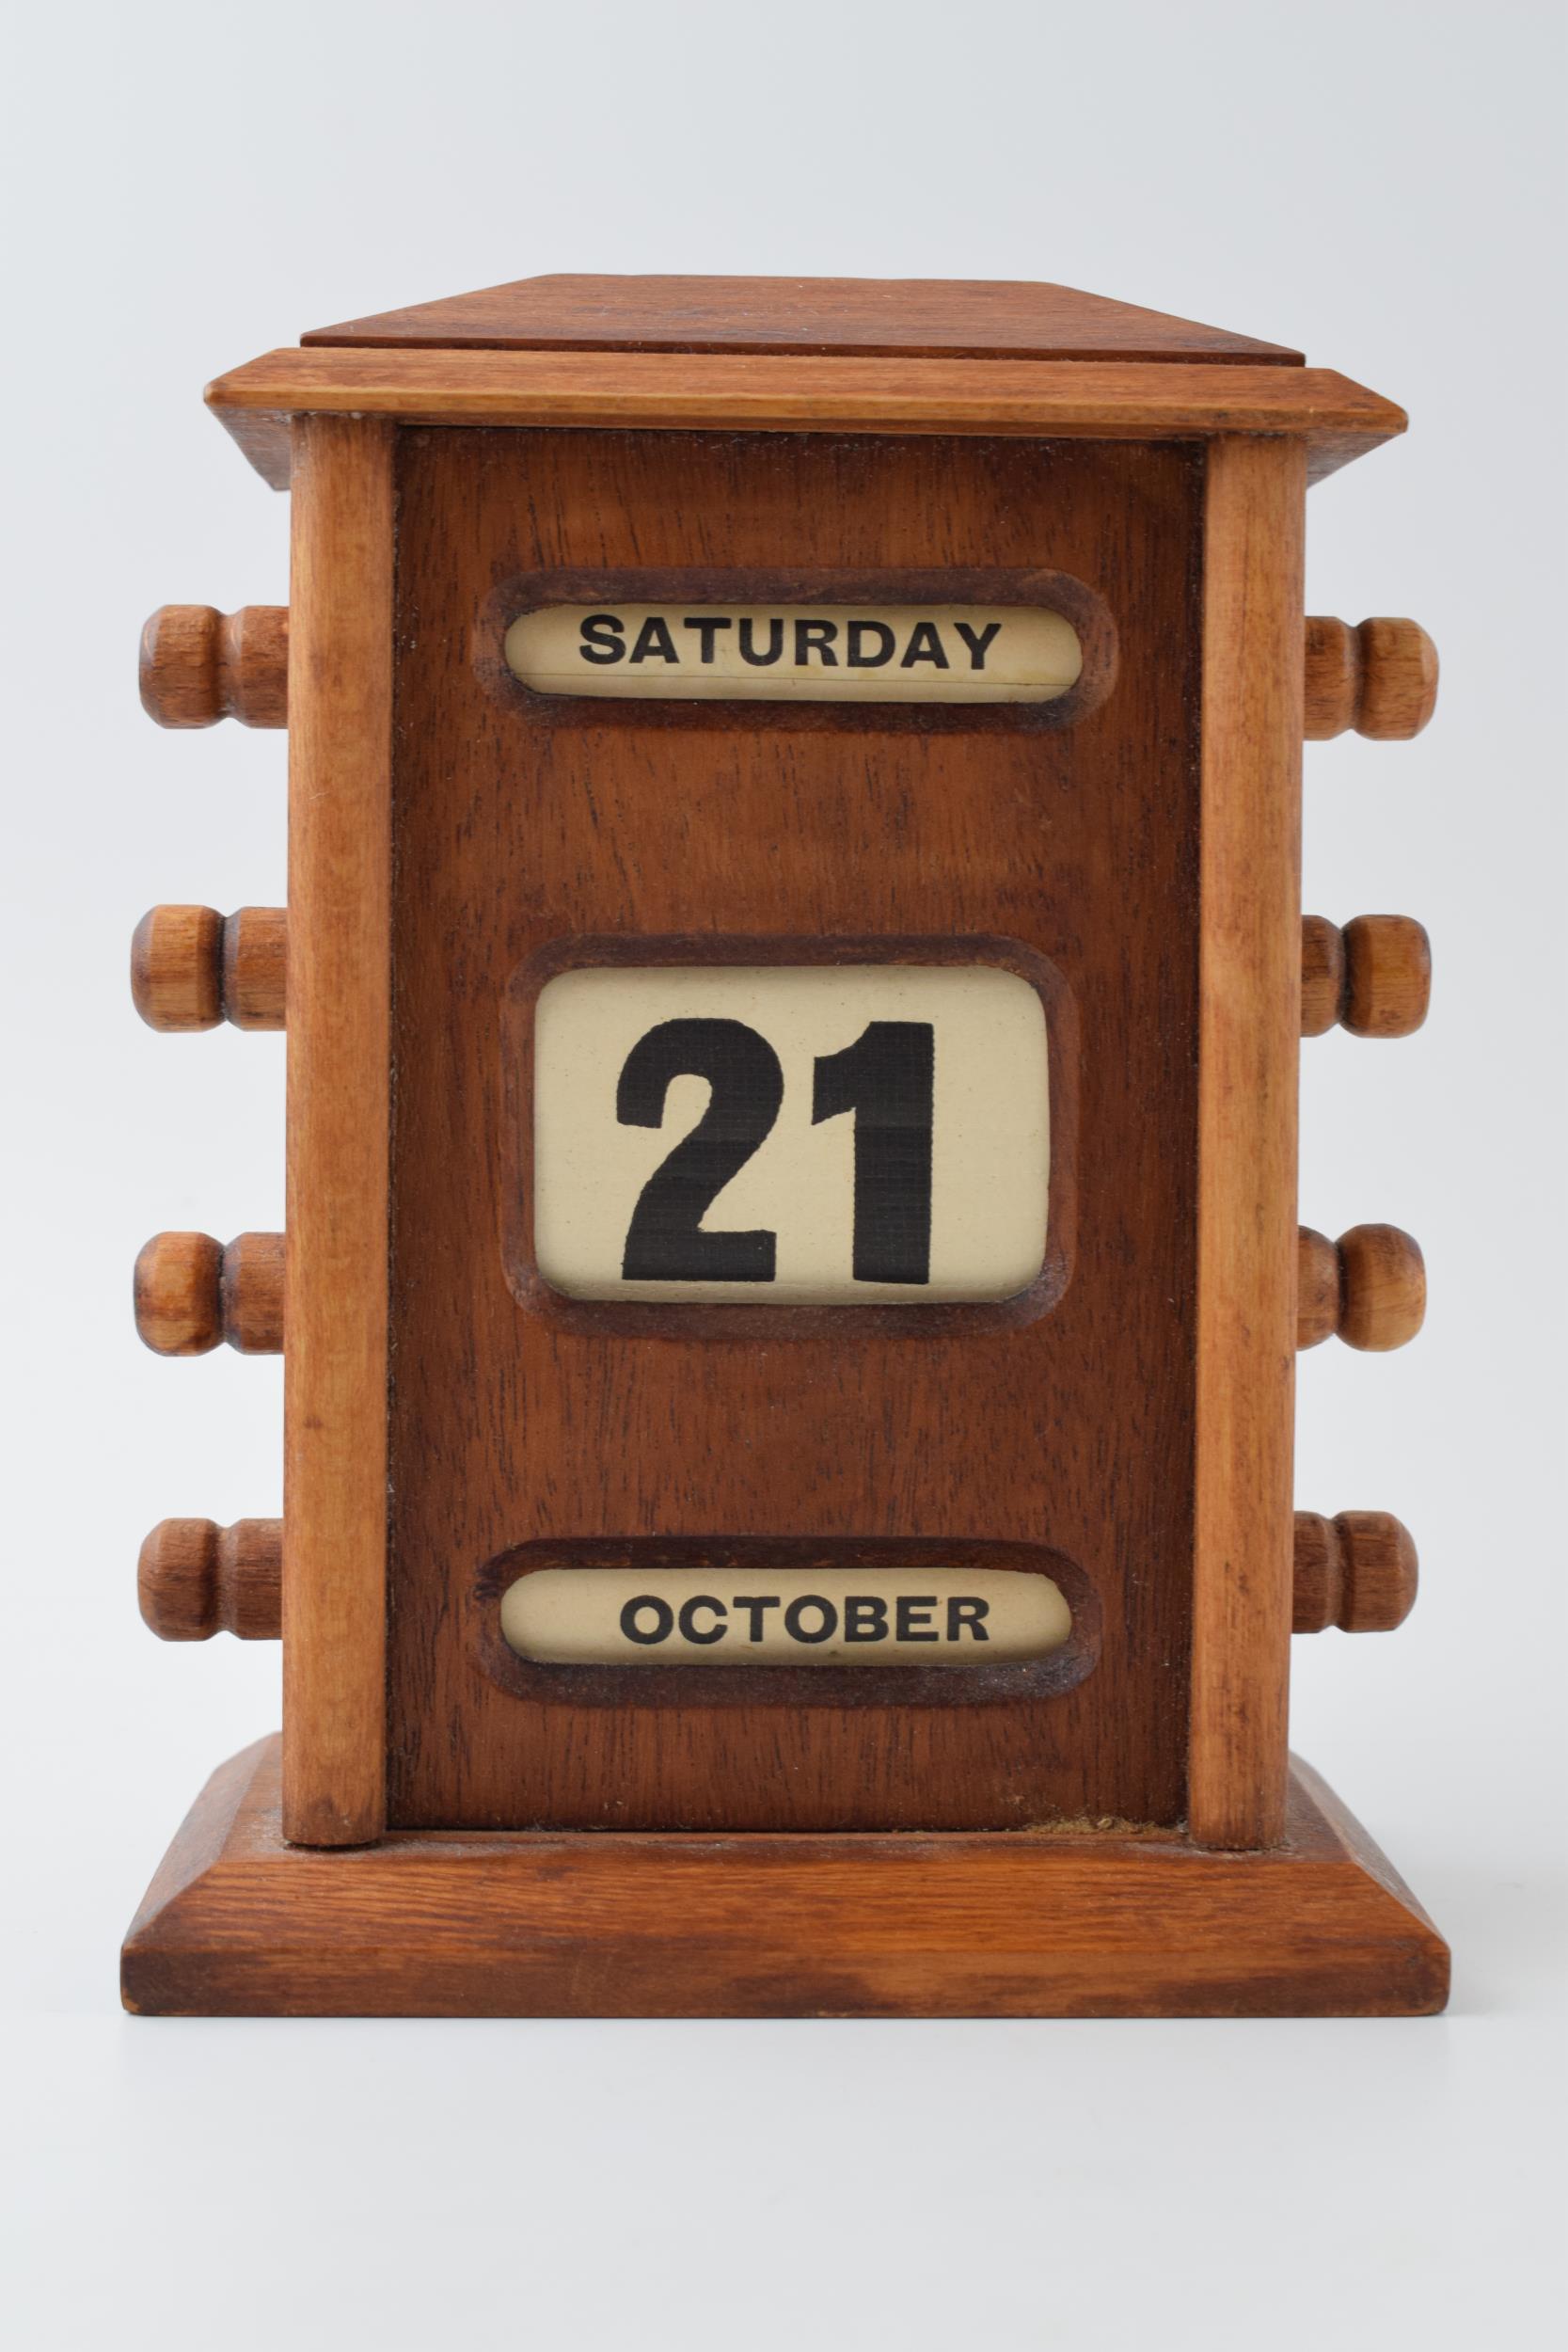 Vintage style perpetual calendar in wooden case with scroll like action, 17cm tall.